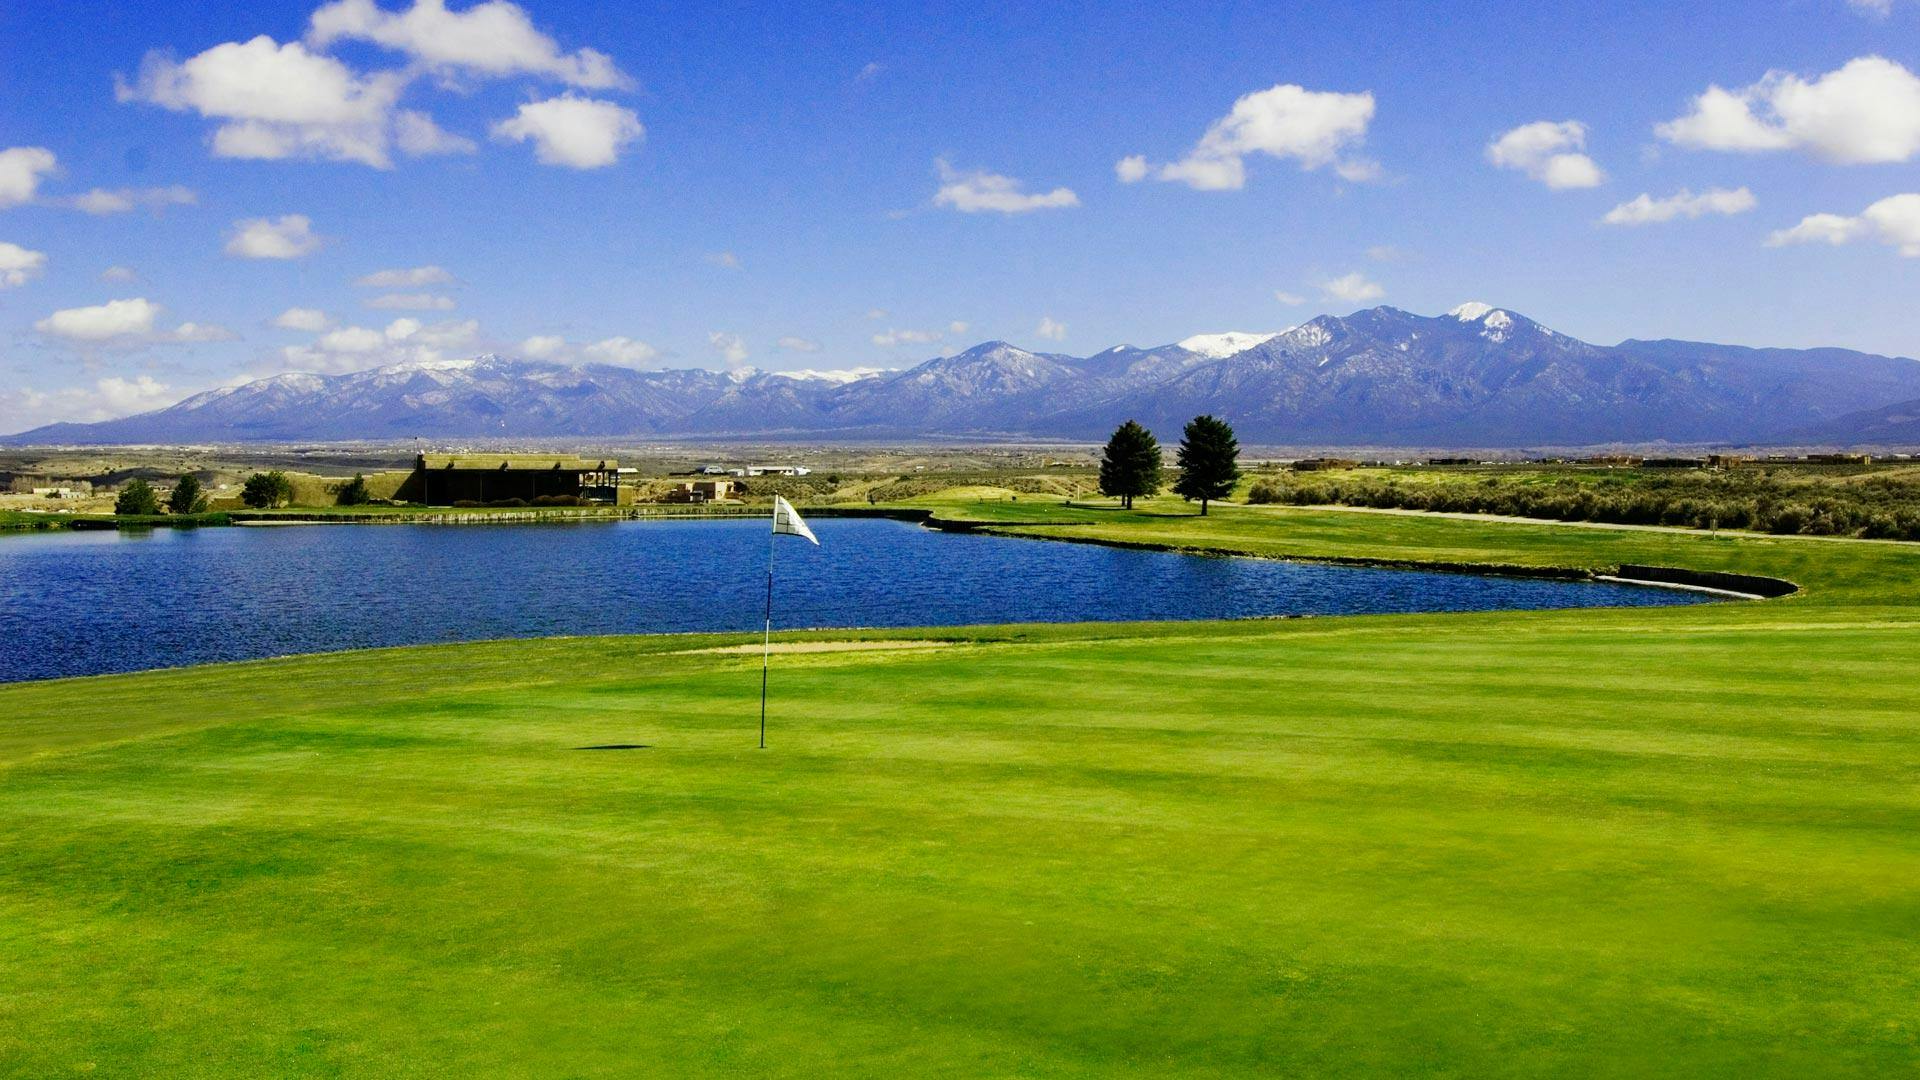 Golf course at taos country club